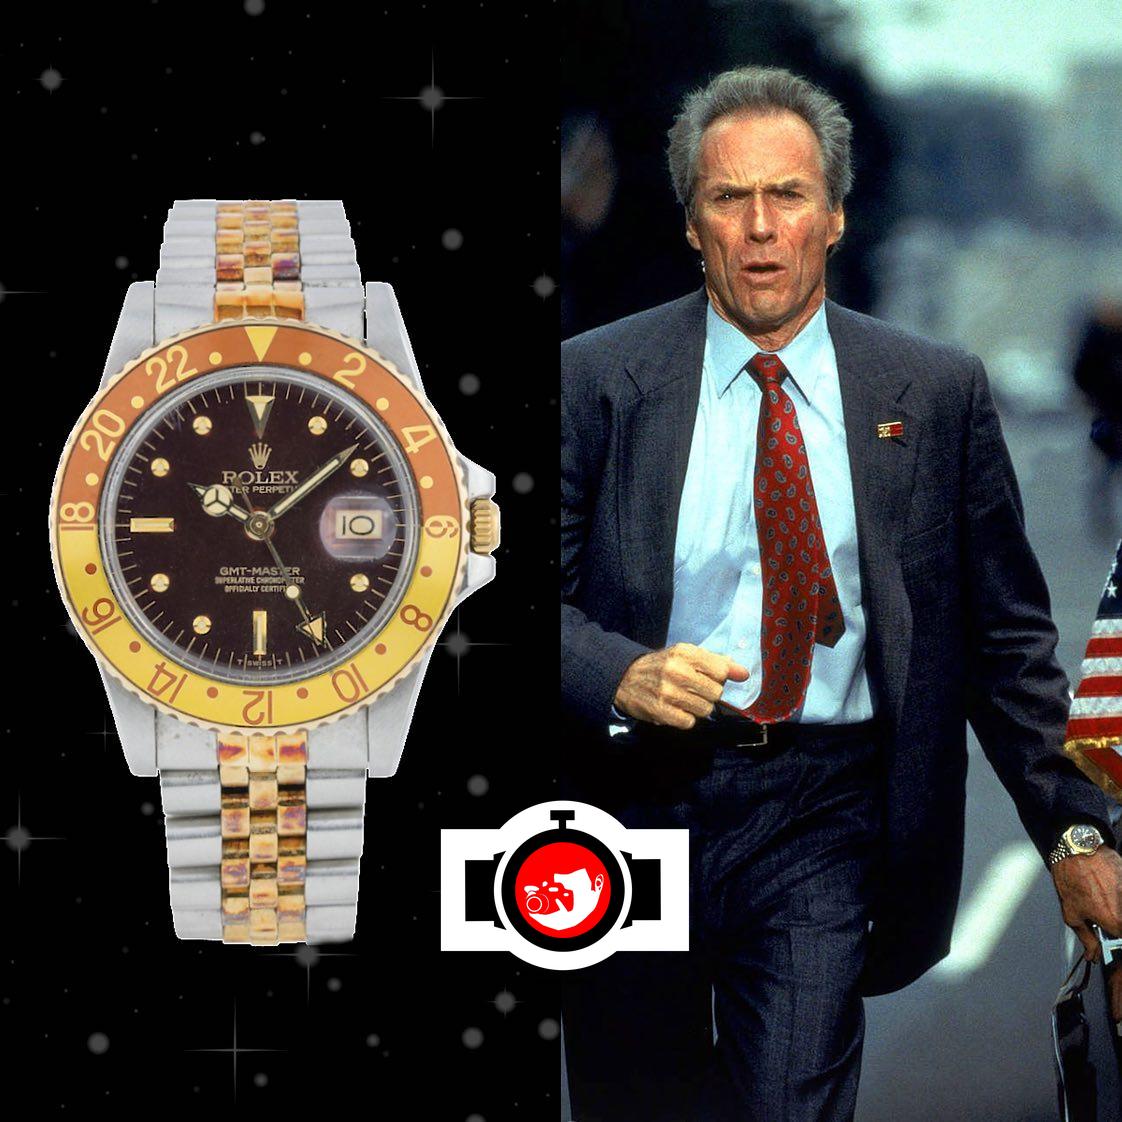 actor Clint Eastwood spotted wearing a Rolex 16753